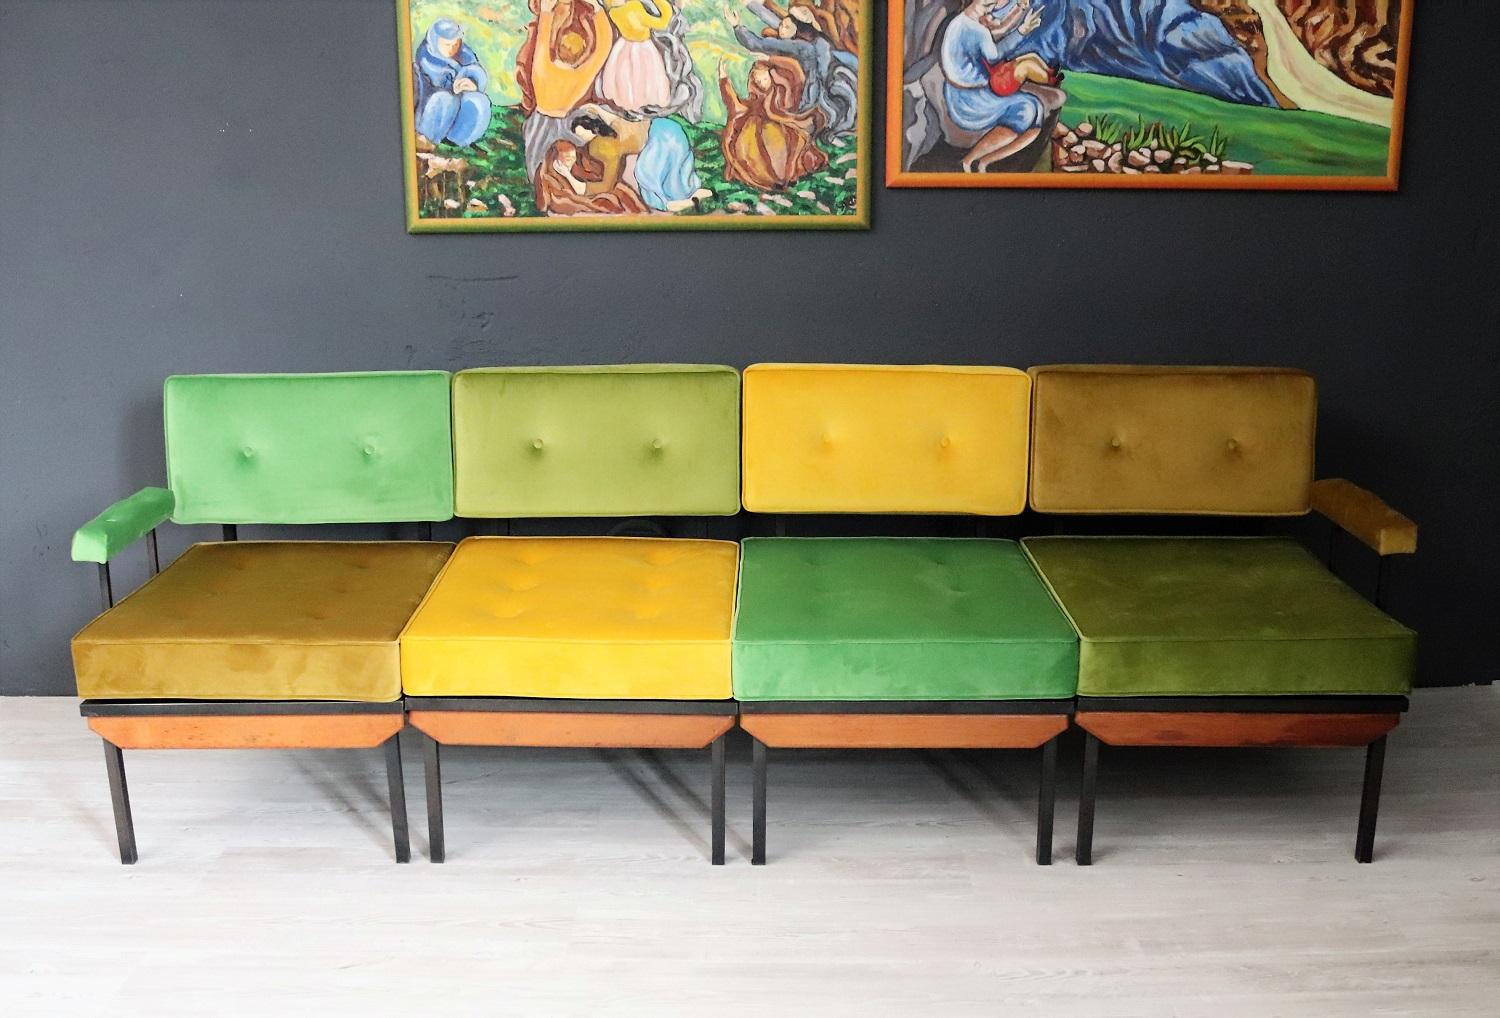 Gorgeous colorful sofa made in Italy in the 1960s.
The sofa is composed of 4 seating elements, which can be used also singularly. The are made of a metal frame with 1 wooden detail in front.
Two elements are equipped with armrests.
The basic